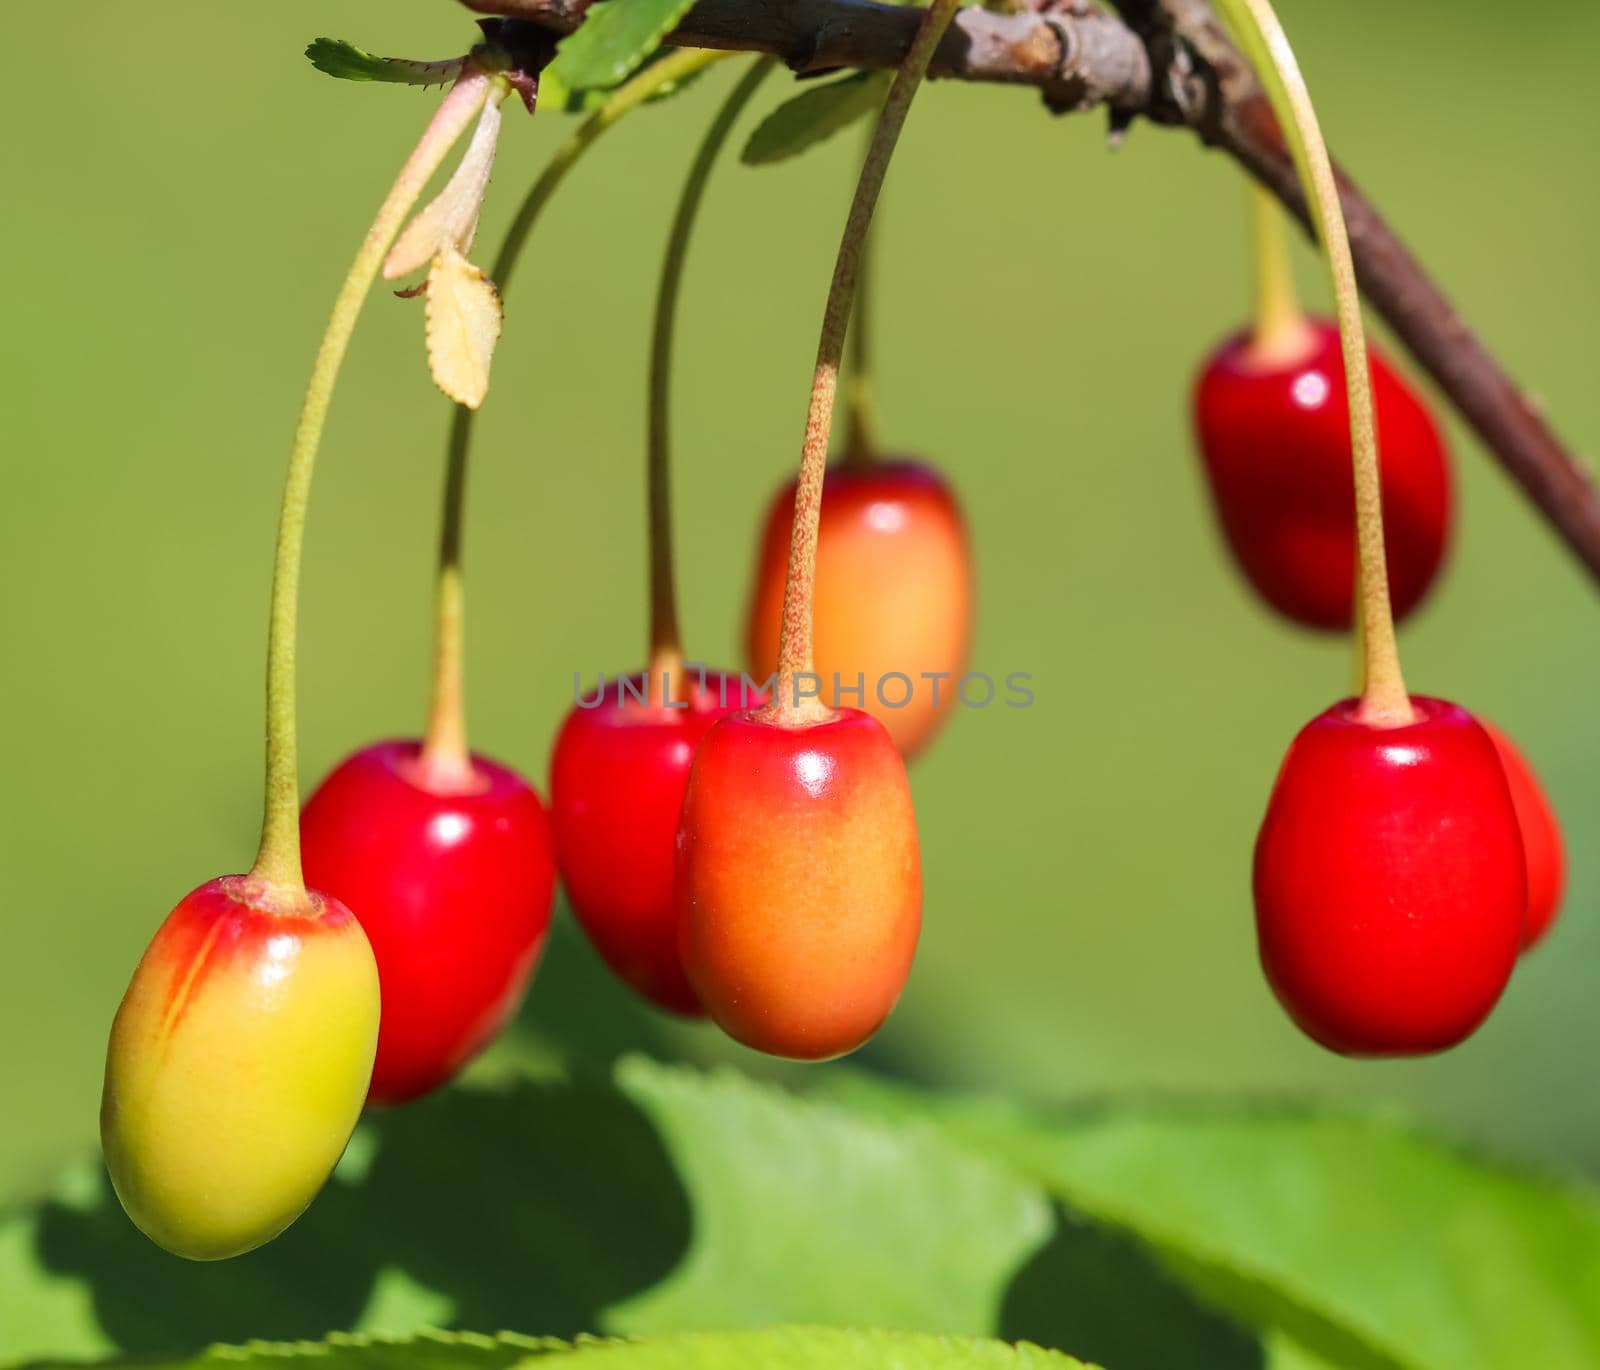 Cherries on a tree branch in the garden by Olayola